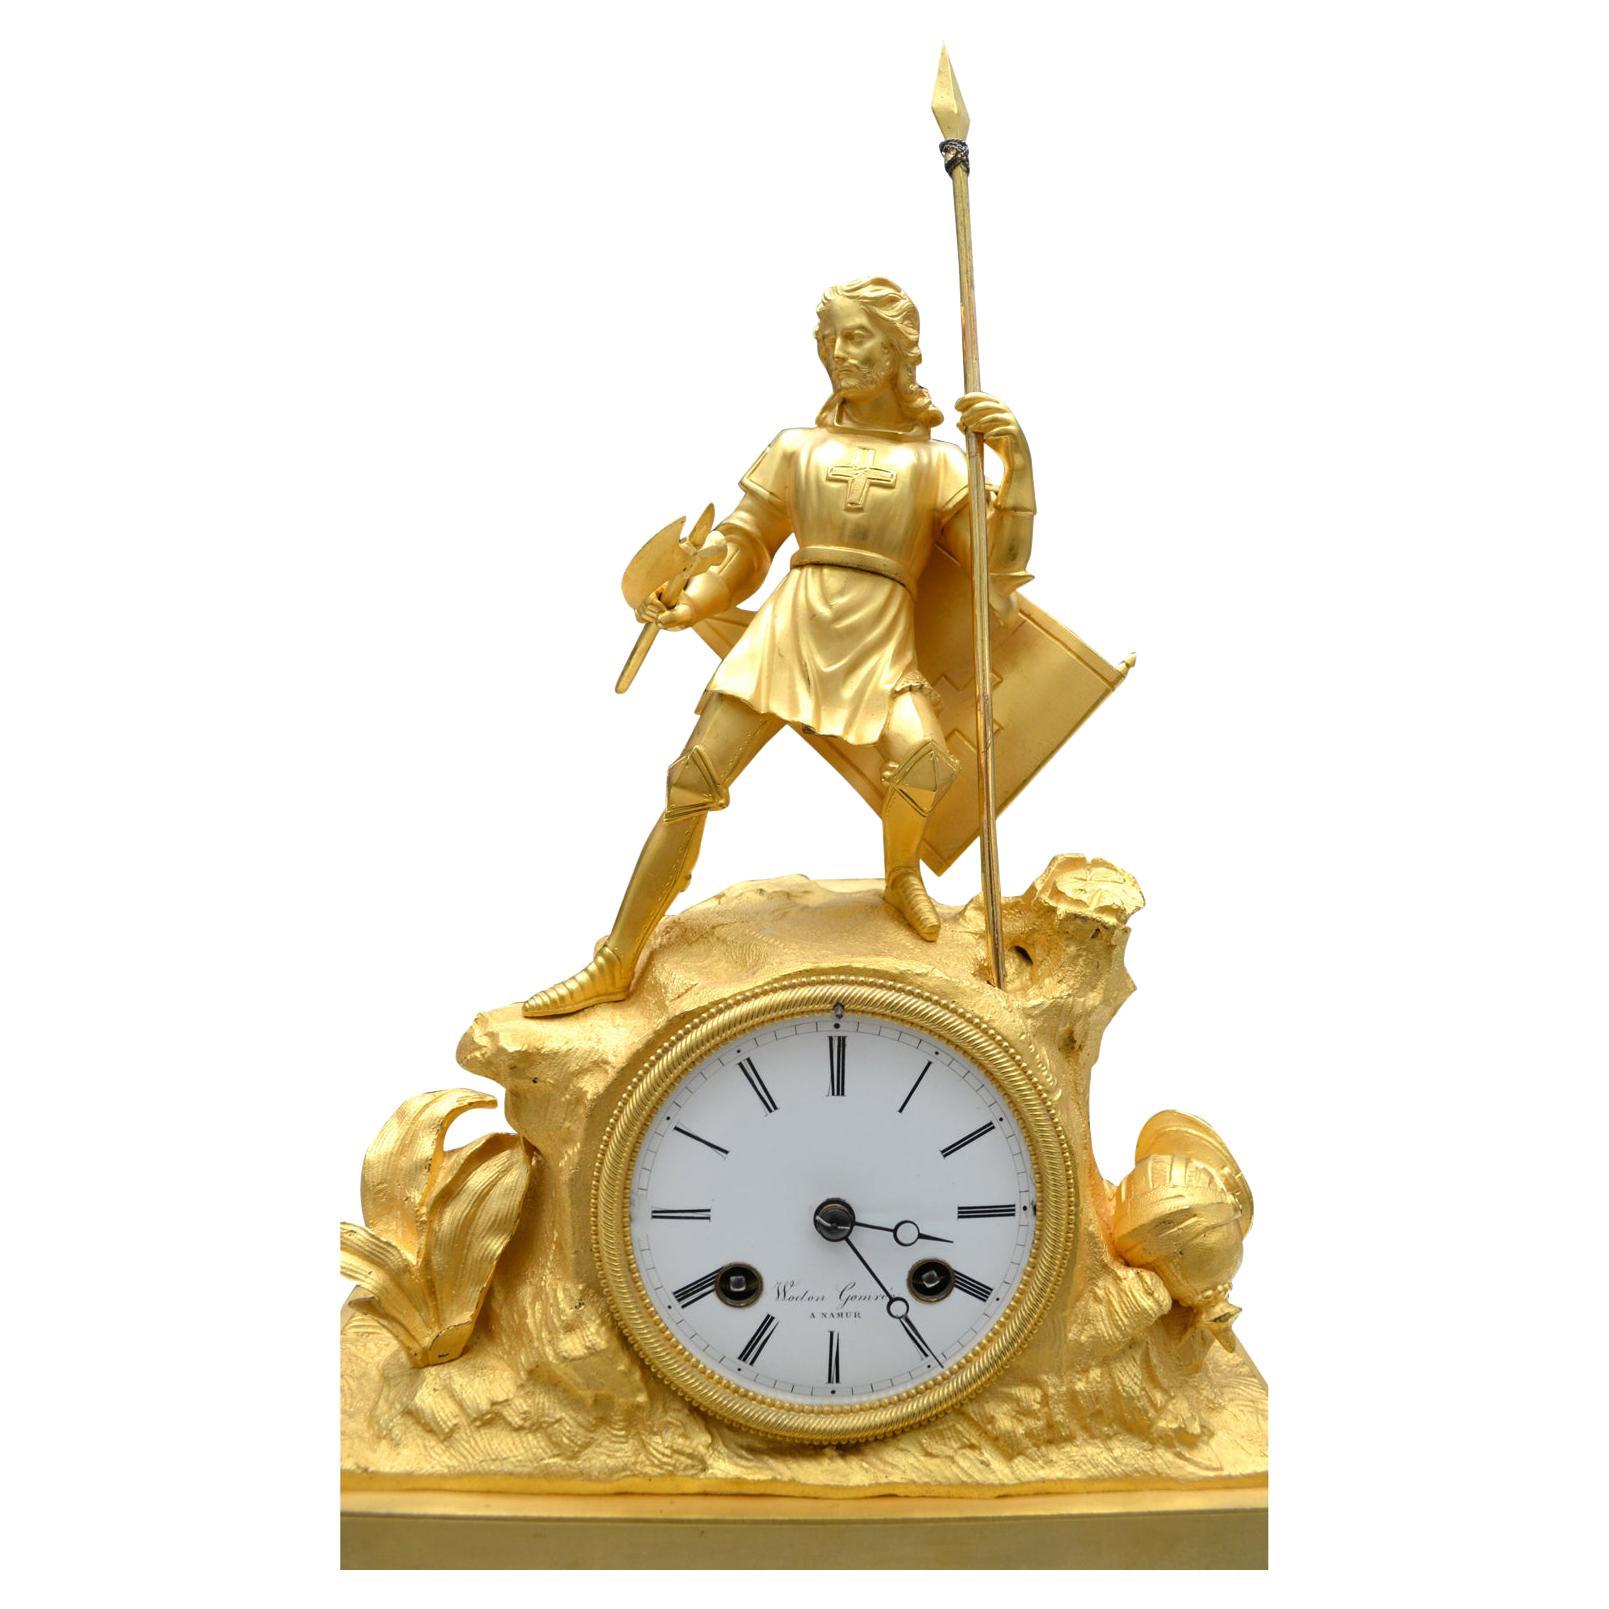 A finely cast gilt bronze figurative clock showing knight crusader stranding on rocky terrain after battle. The knight has a spear in one hand, a battle axe in the other, his helmet lying on the ground at his feet and his shield slung back across